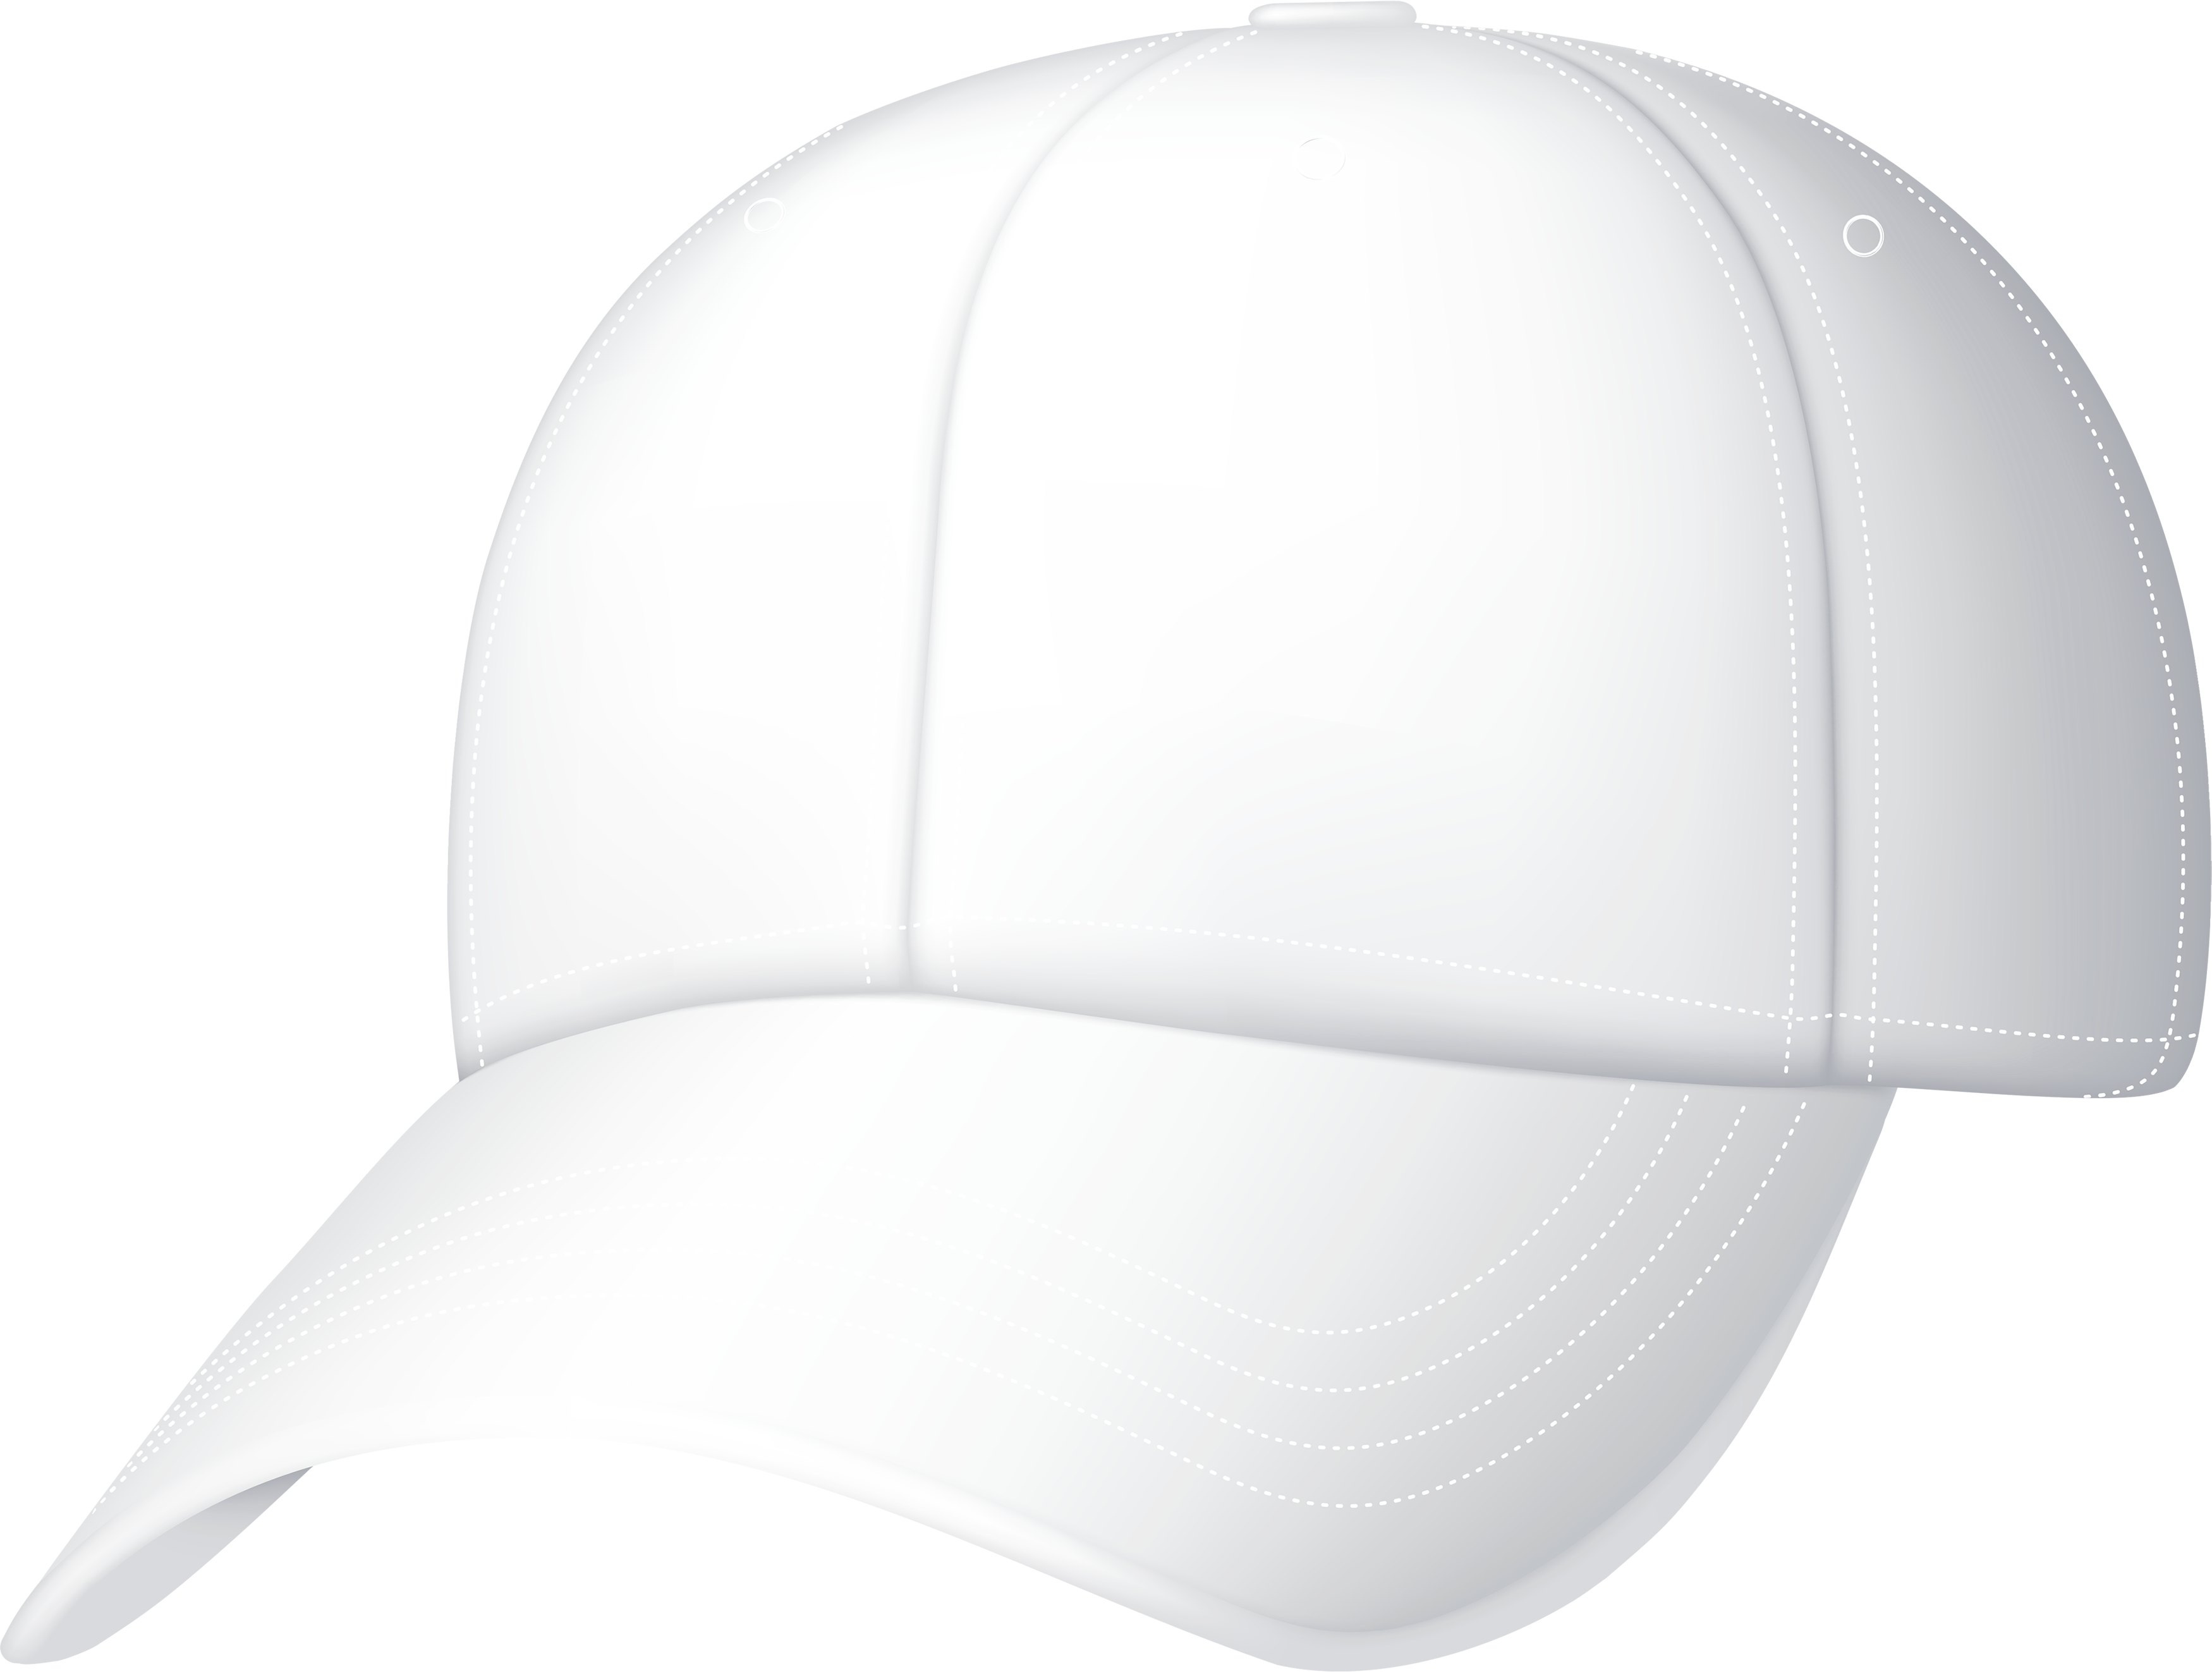 Cap PNG Black And White-PlusP